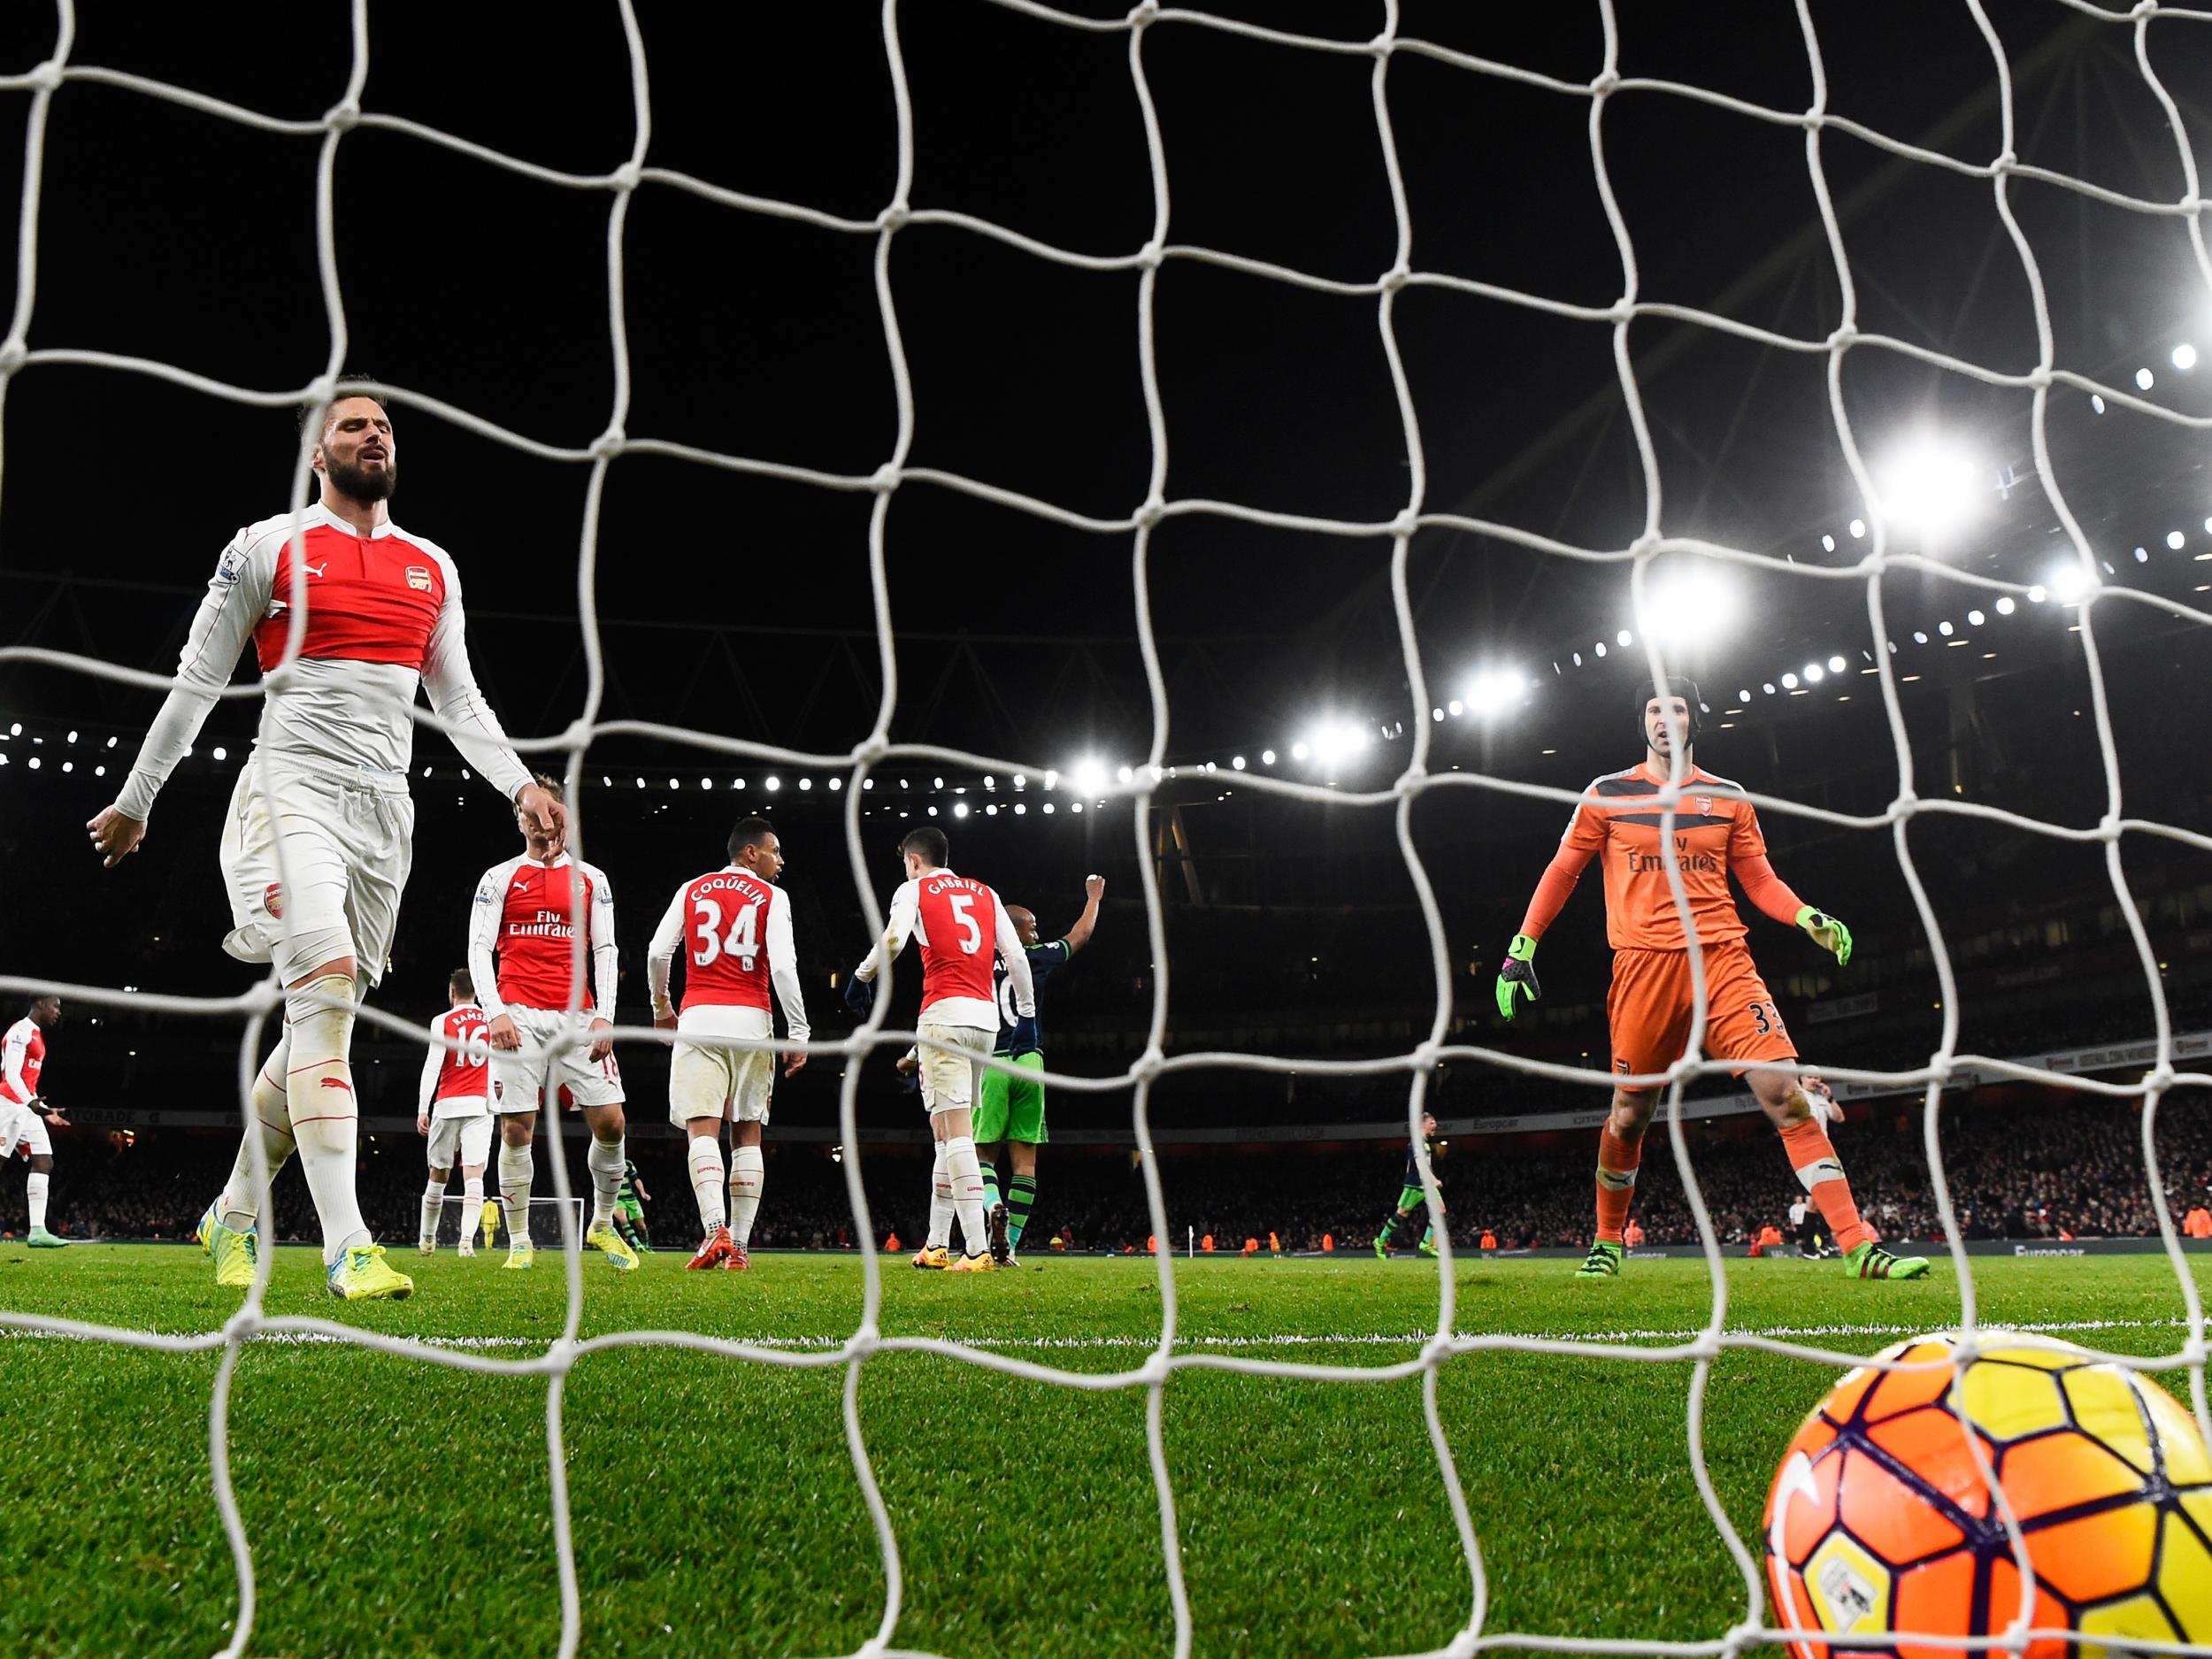 Arsenal players look on as Ashley Williams scores a winner for Swansea